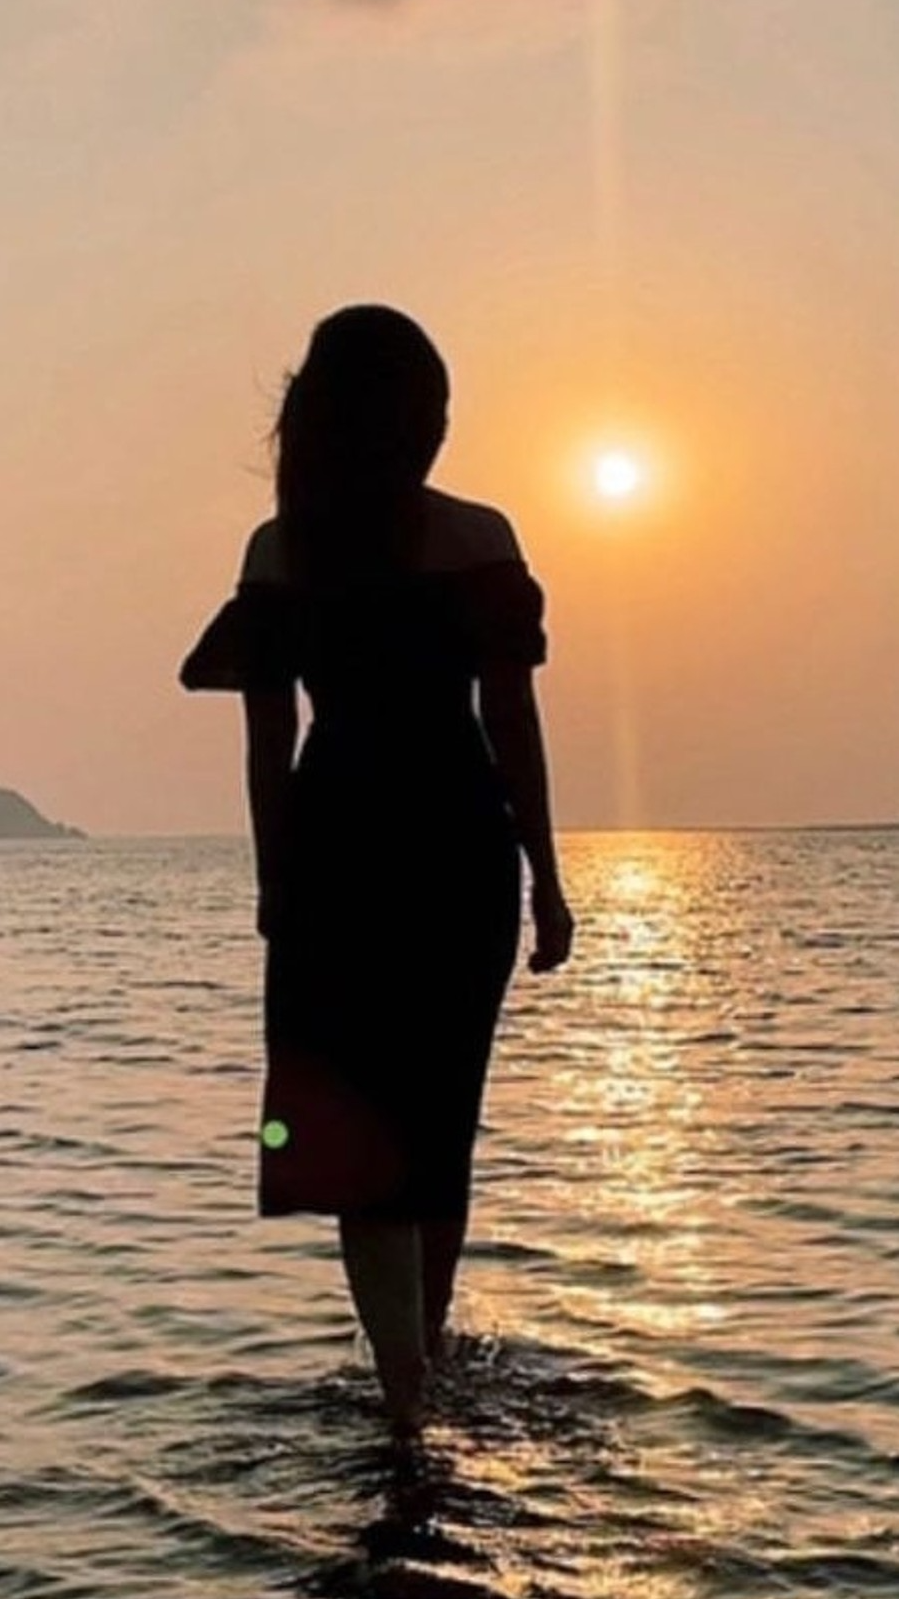 South diva's immersed in the beauty of sunset | Times of India